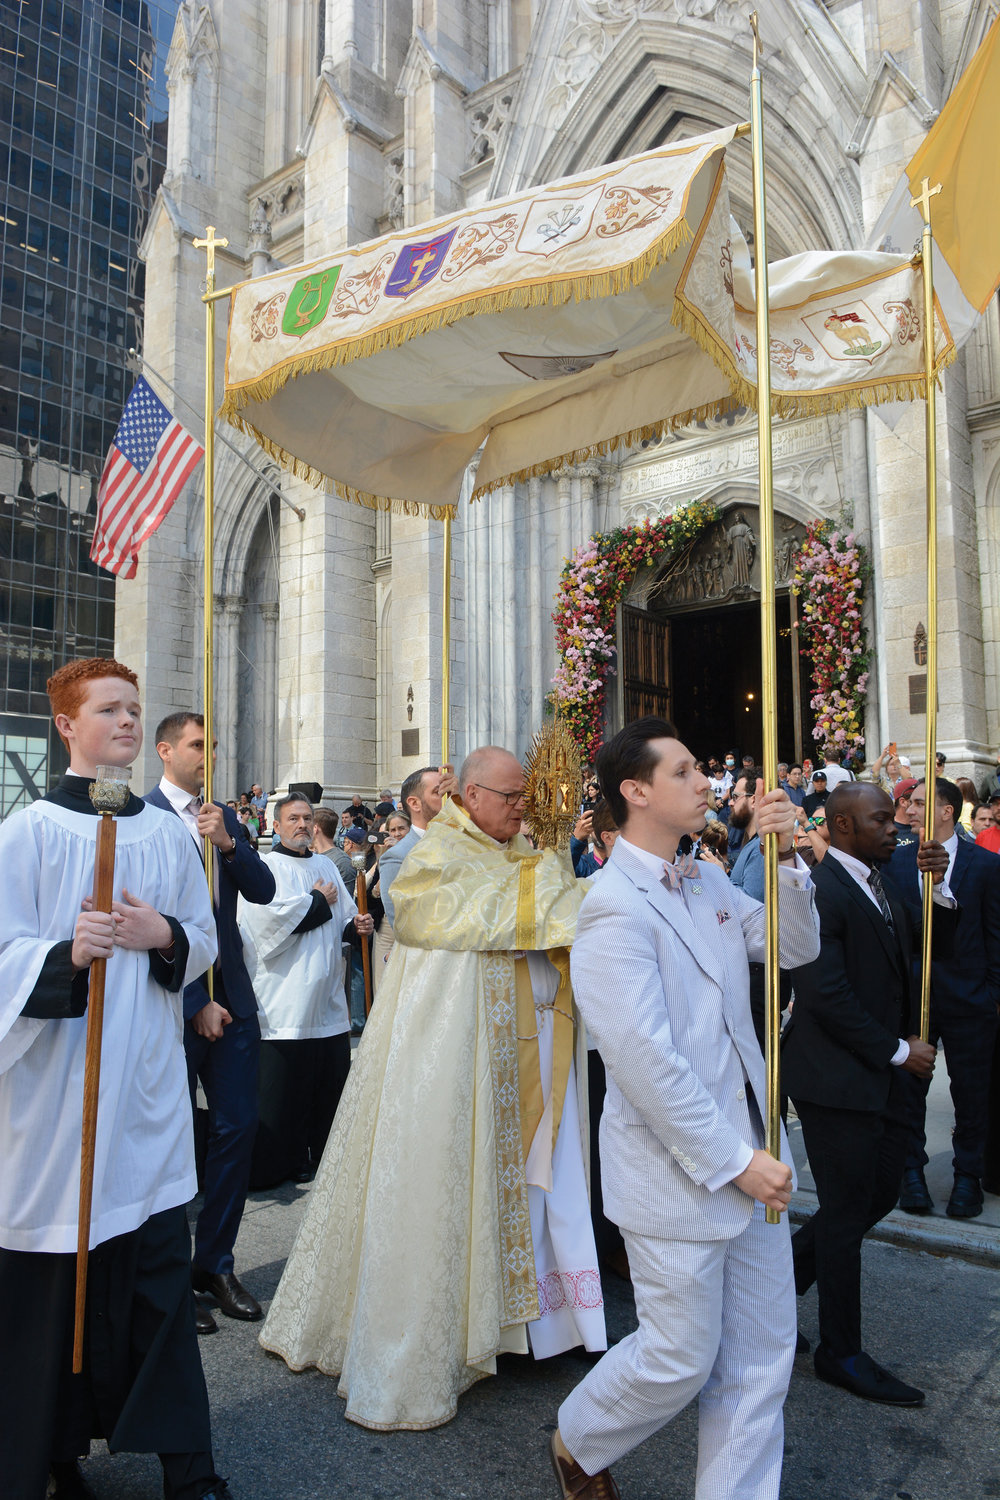 Cardinal Dolan, center, presides at the Corpus Christi procession outside St. Patrick’s Cathedral June 19, the Solemnity of the Most Holy Body and Blood of Christ, following the 10:15 a.m. Mass he celebrated inside the cathedral.